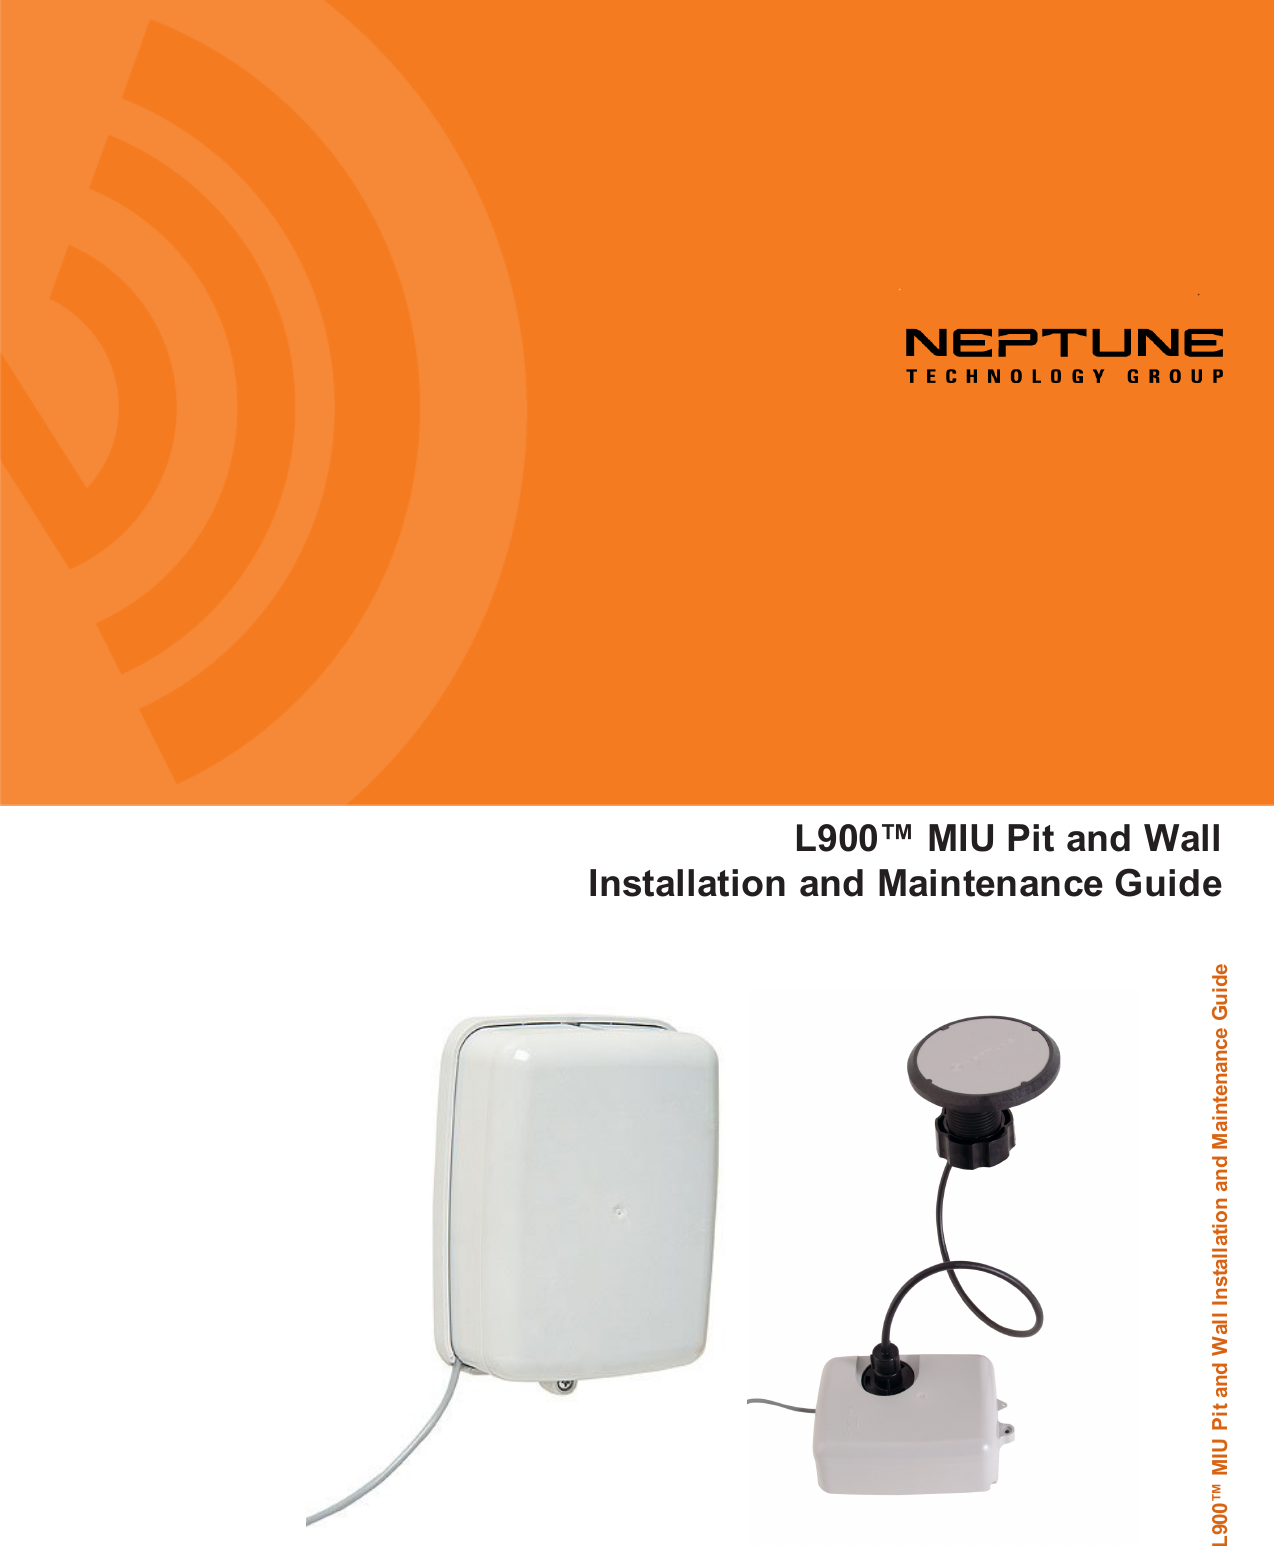 L900™ MIU Pit and Wall Installation and Maintenance GuideL900™ MIU Pit and WallInstallation and Maintenance Guide